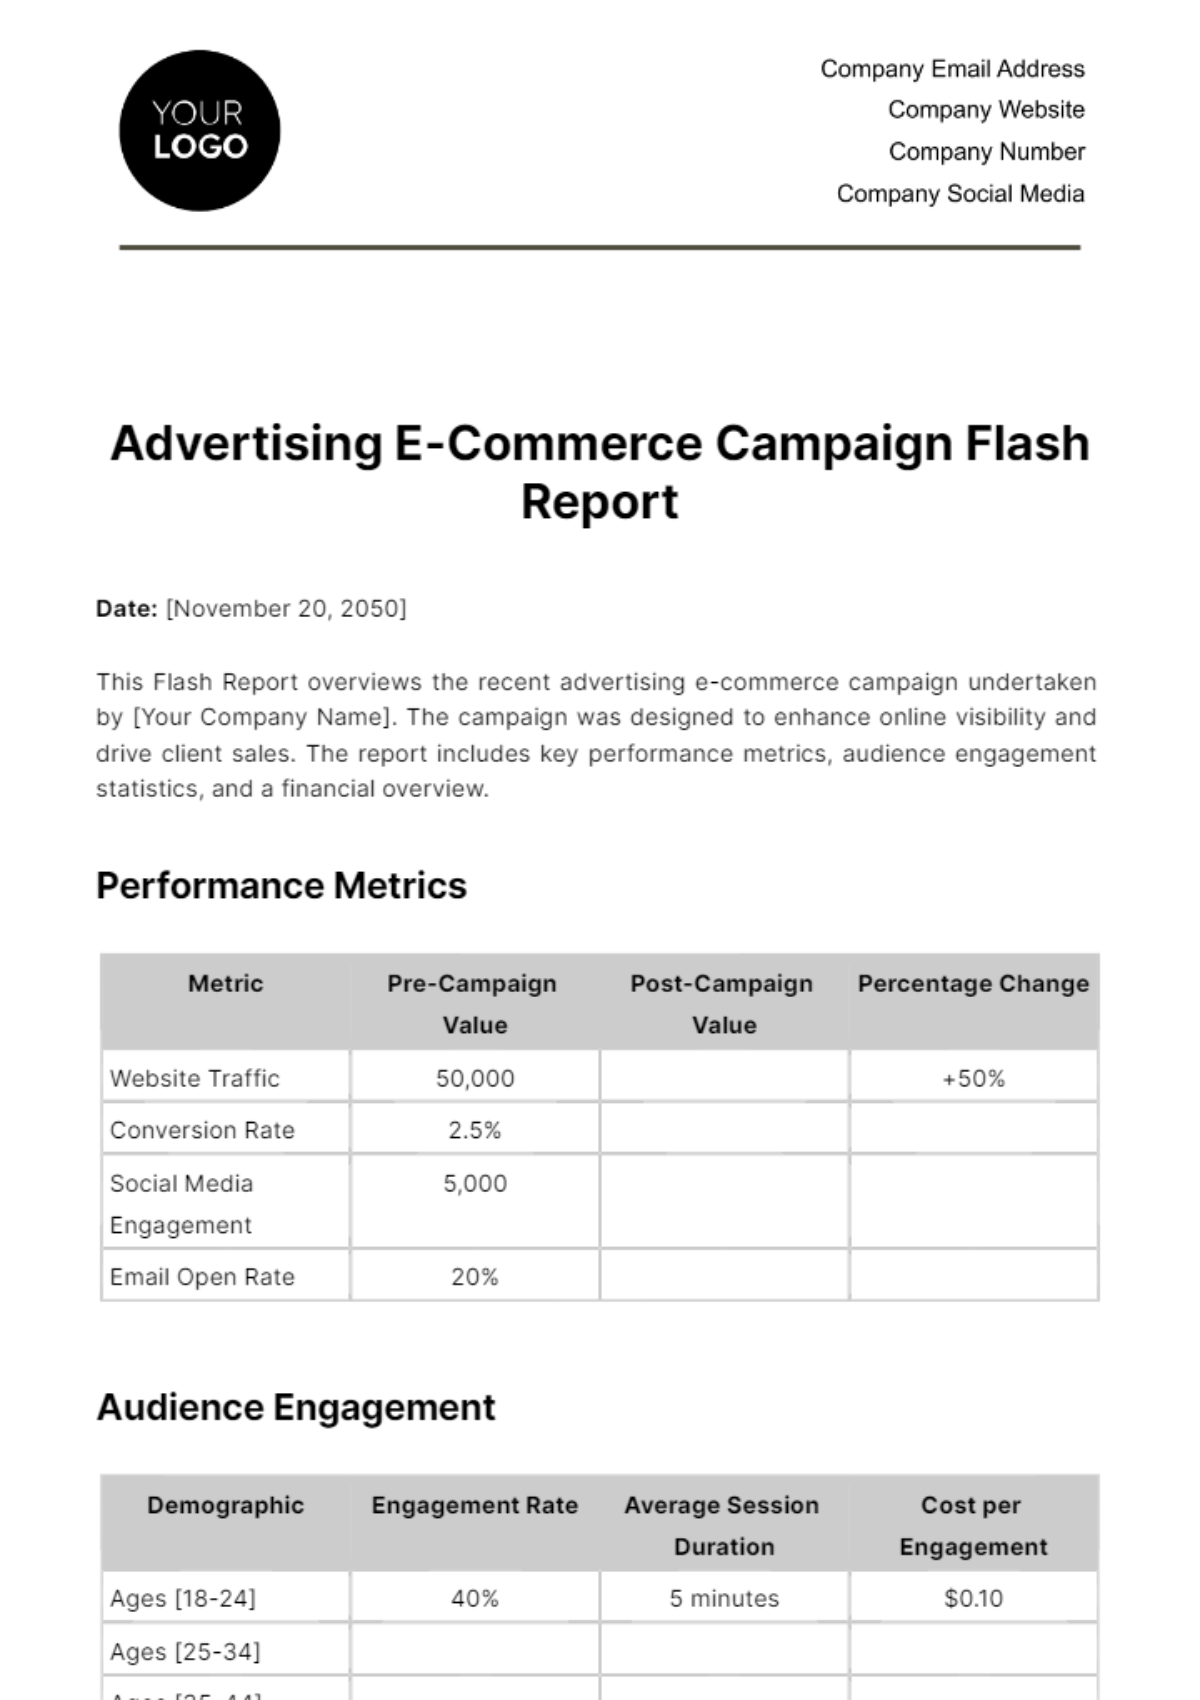 Free Advertising E-commerce Campaign Flash Report Template